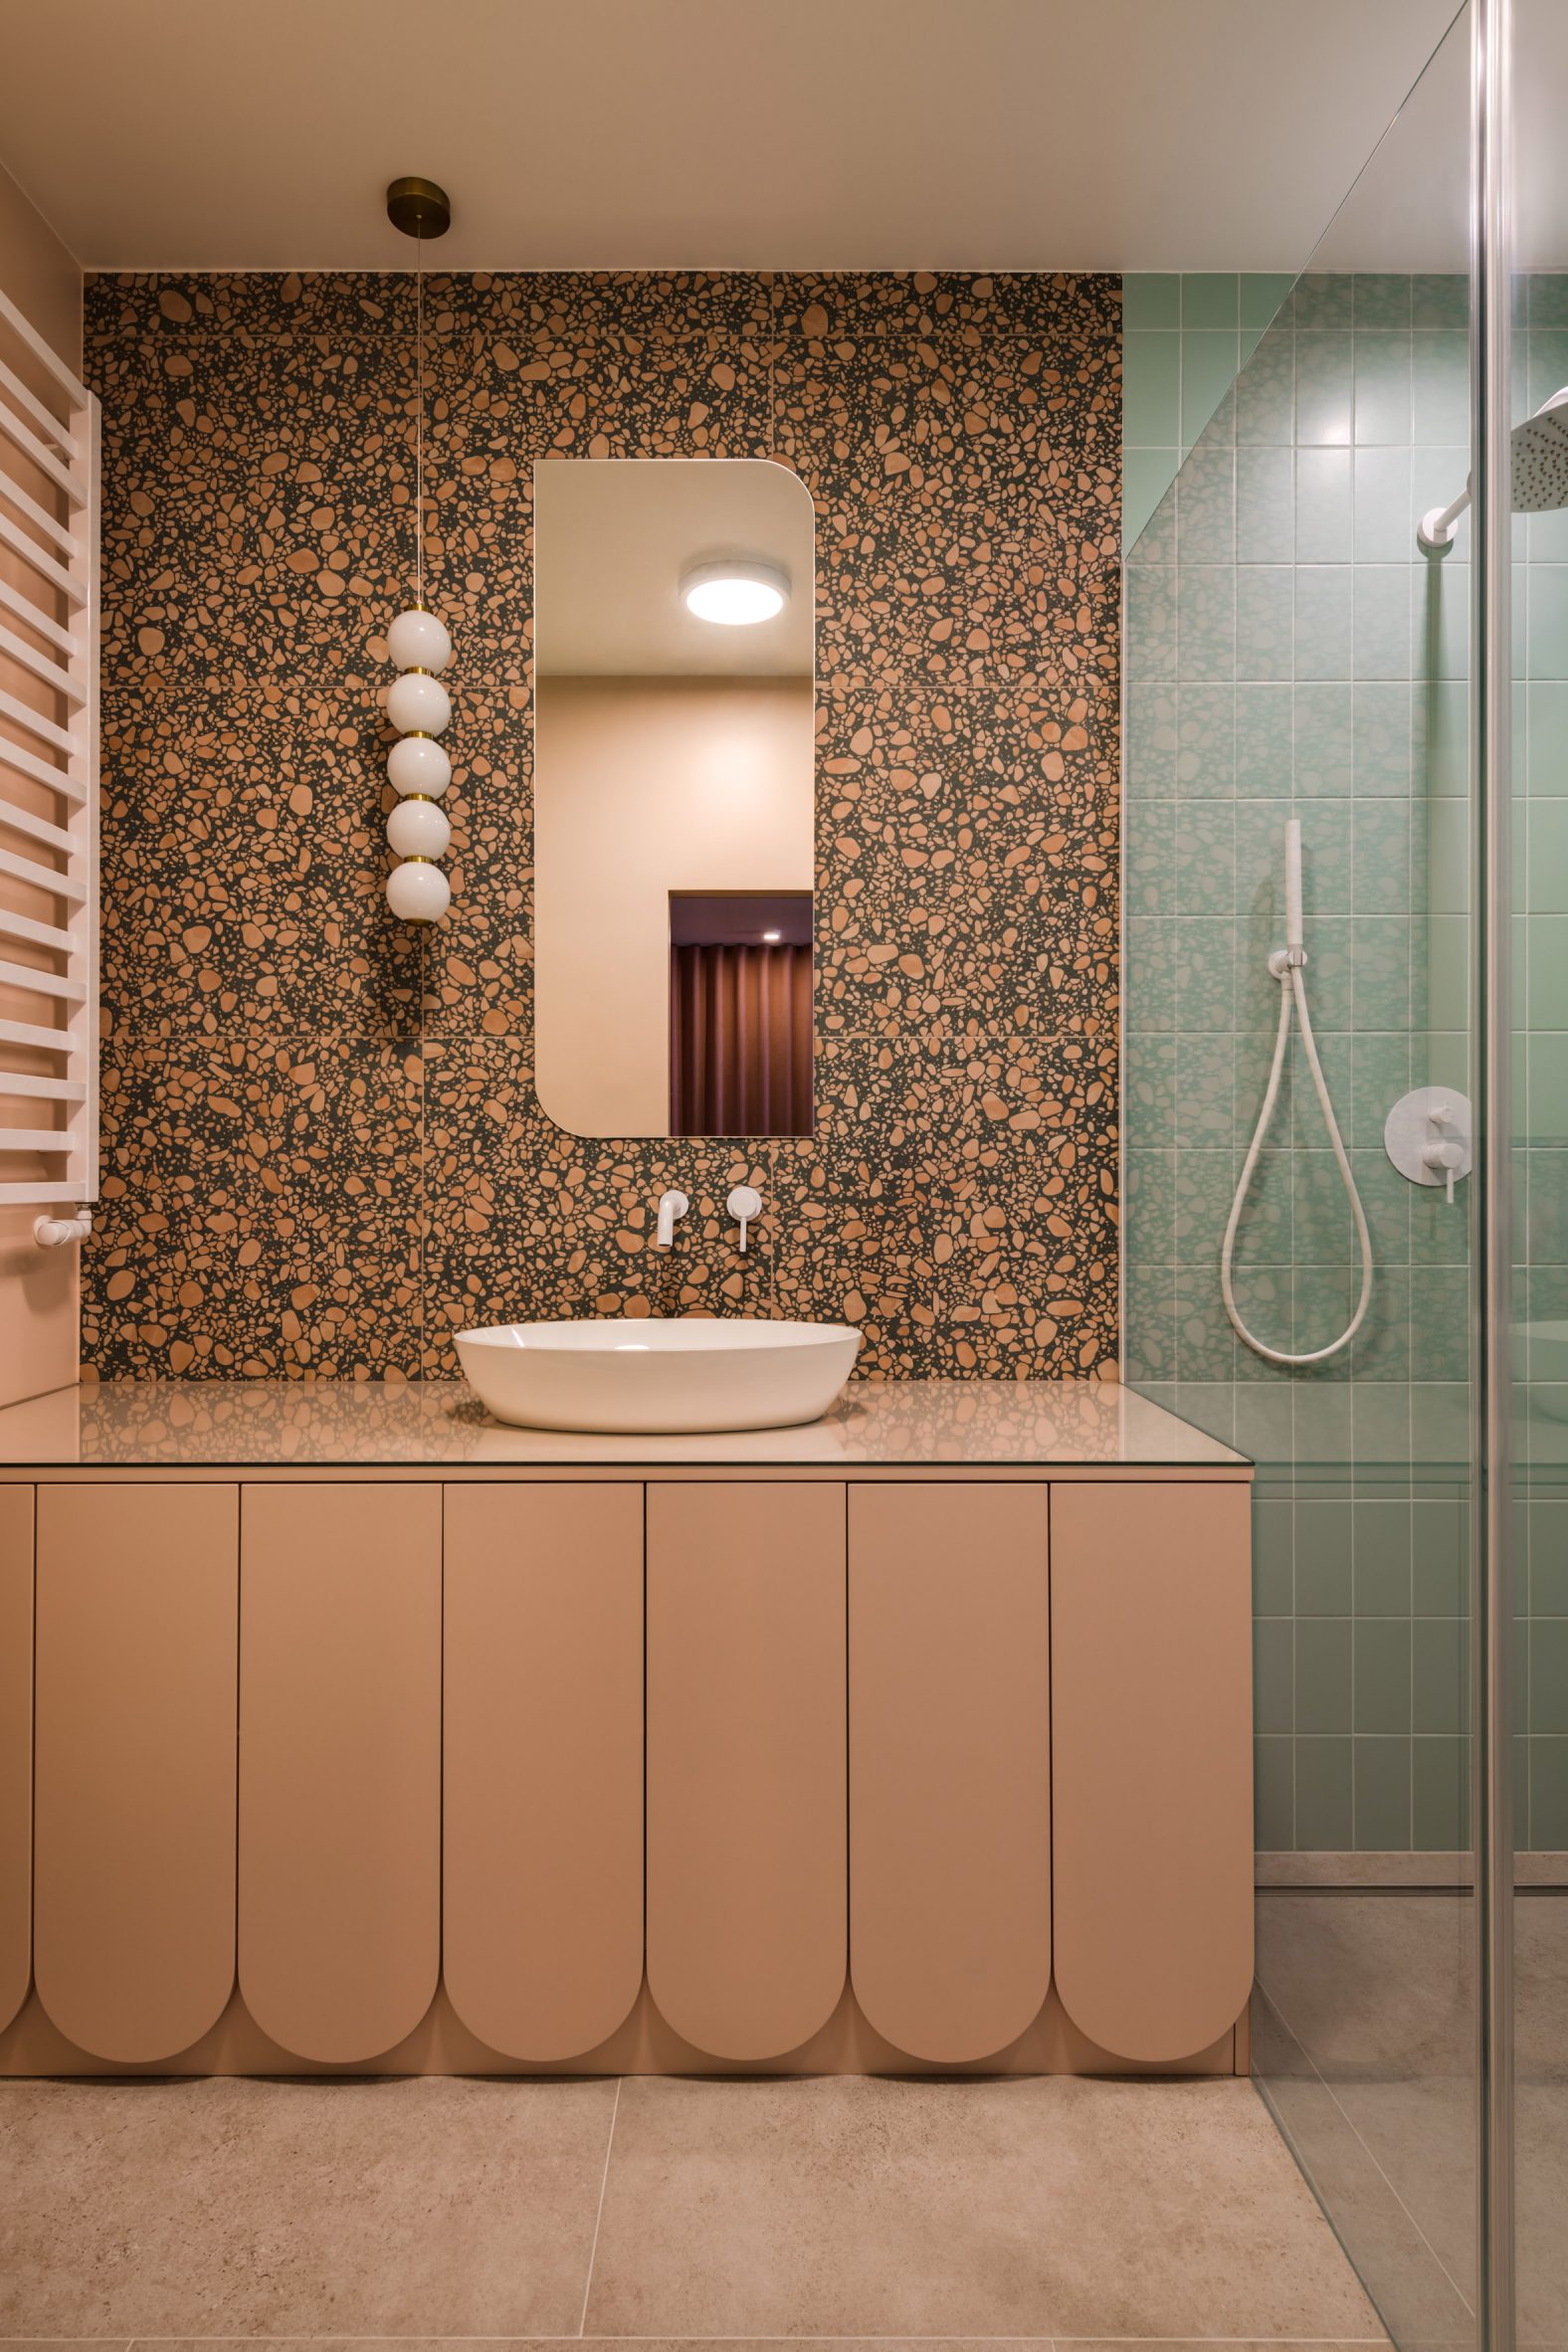 Bathroom with terrazzo tiles and a walk-in shower